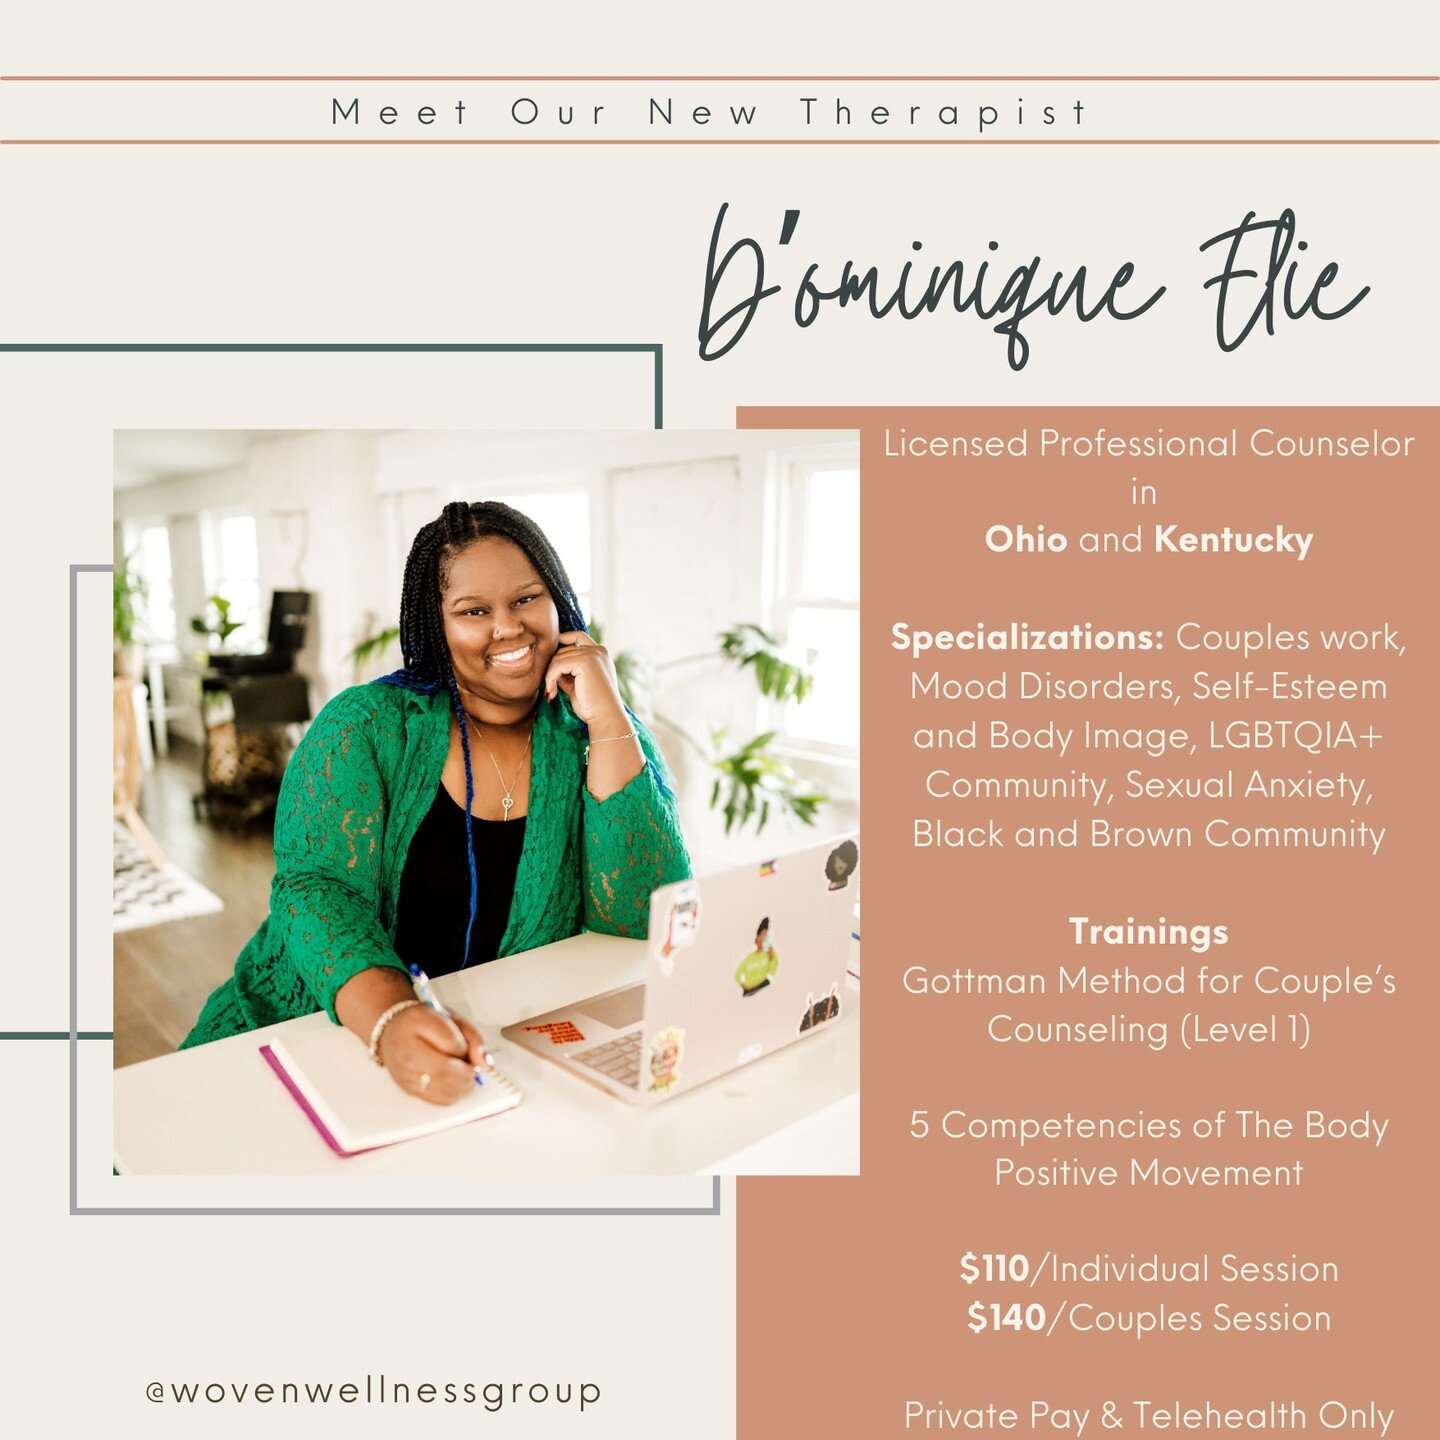 Introducing our new therapist, D'ominique Elie, M.A., LPC, LPCA! 

D'ominique is licensed in both Ohio and Kentucky and has availability in the evenings. She is currently private pay and seeing clients through Telehealth. 

Head to our website to see